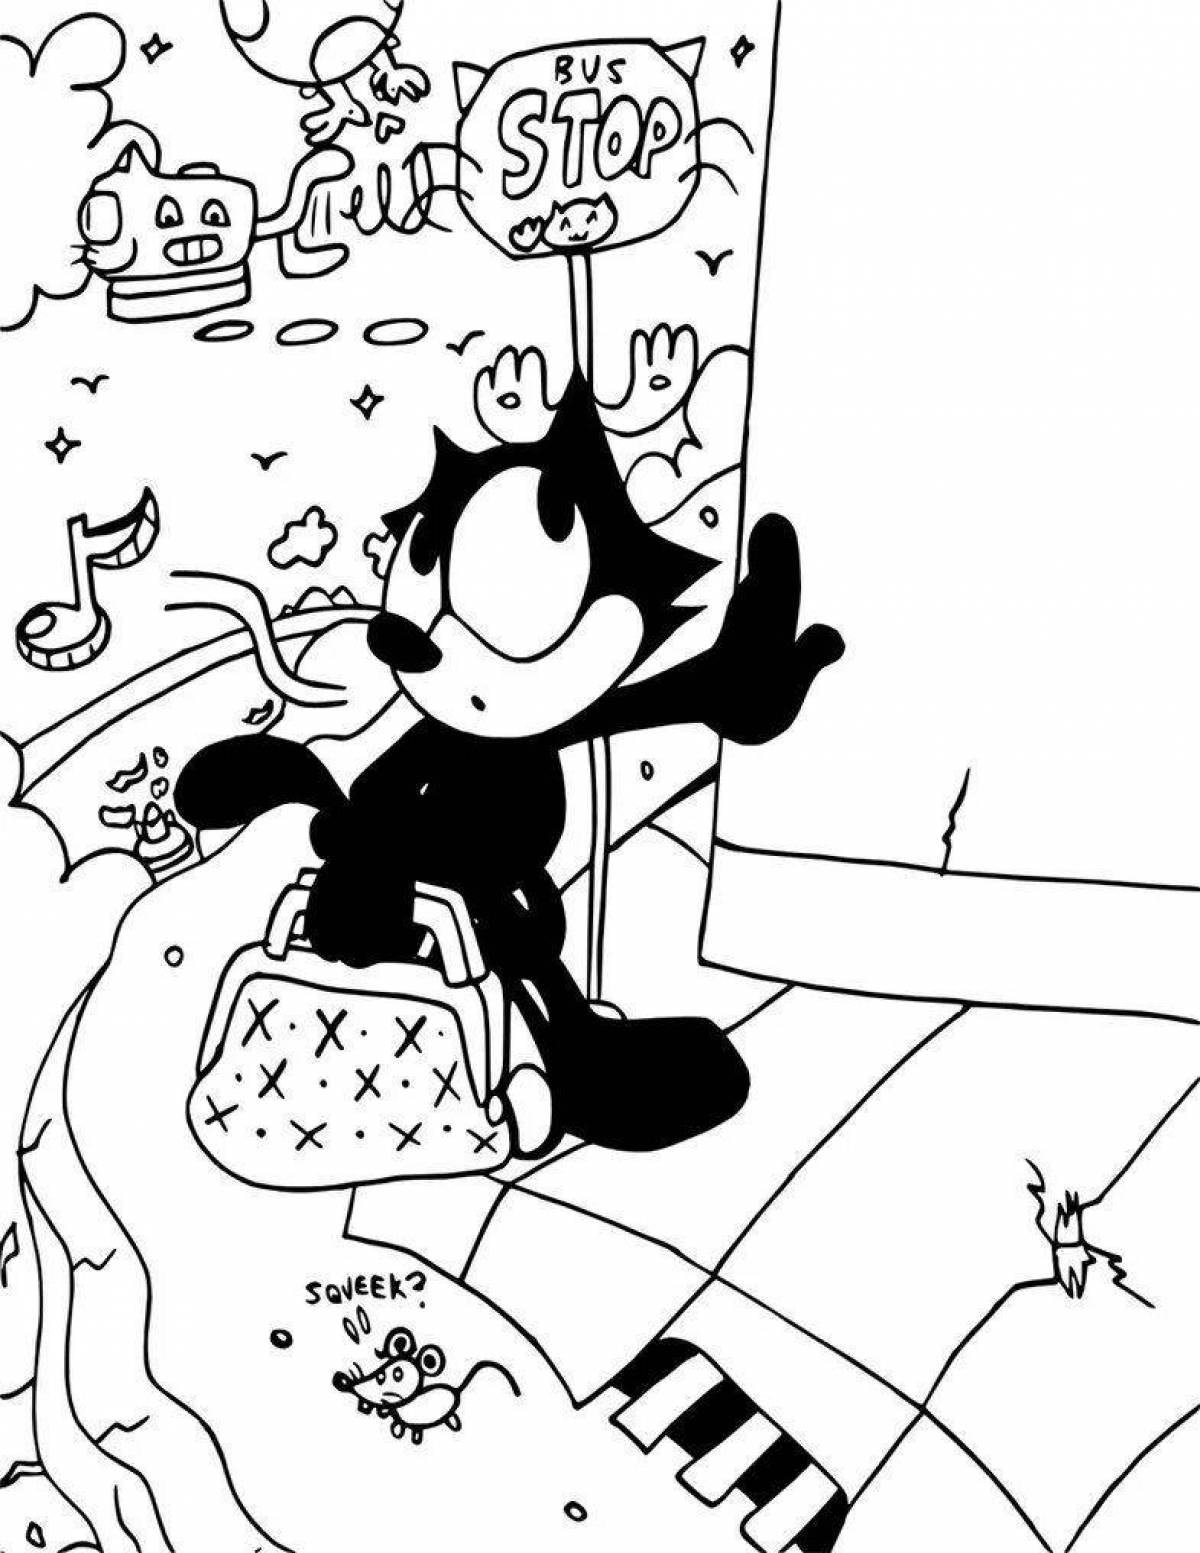 Playful felix coloring page